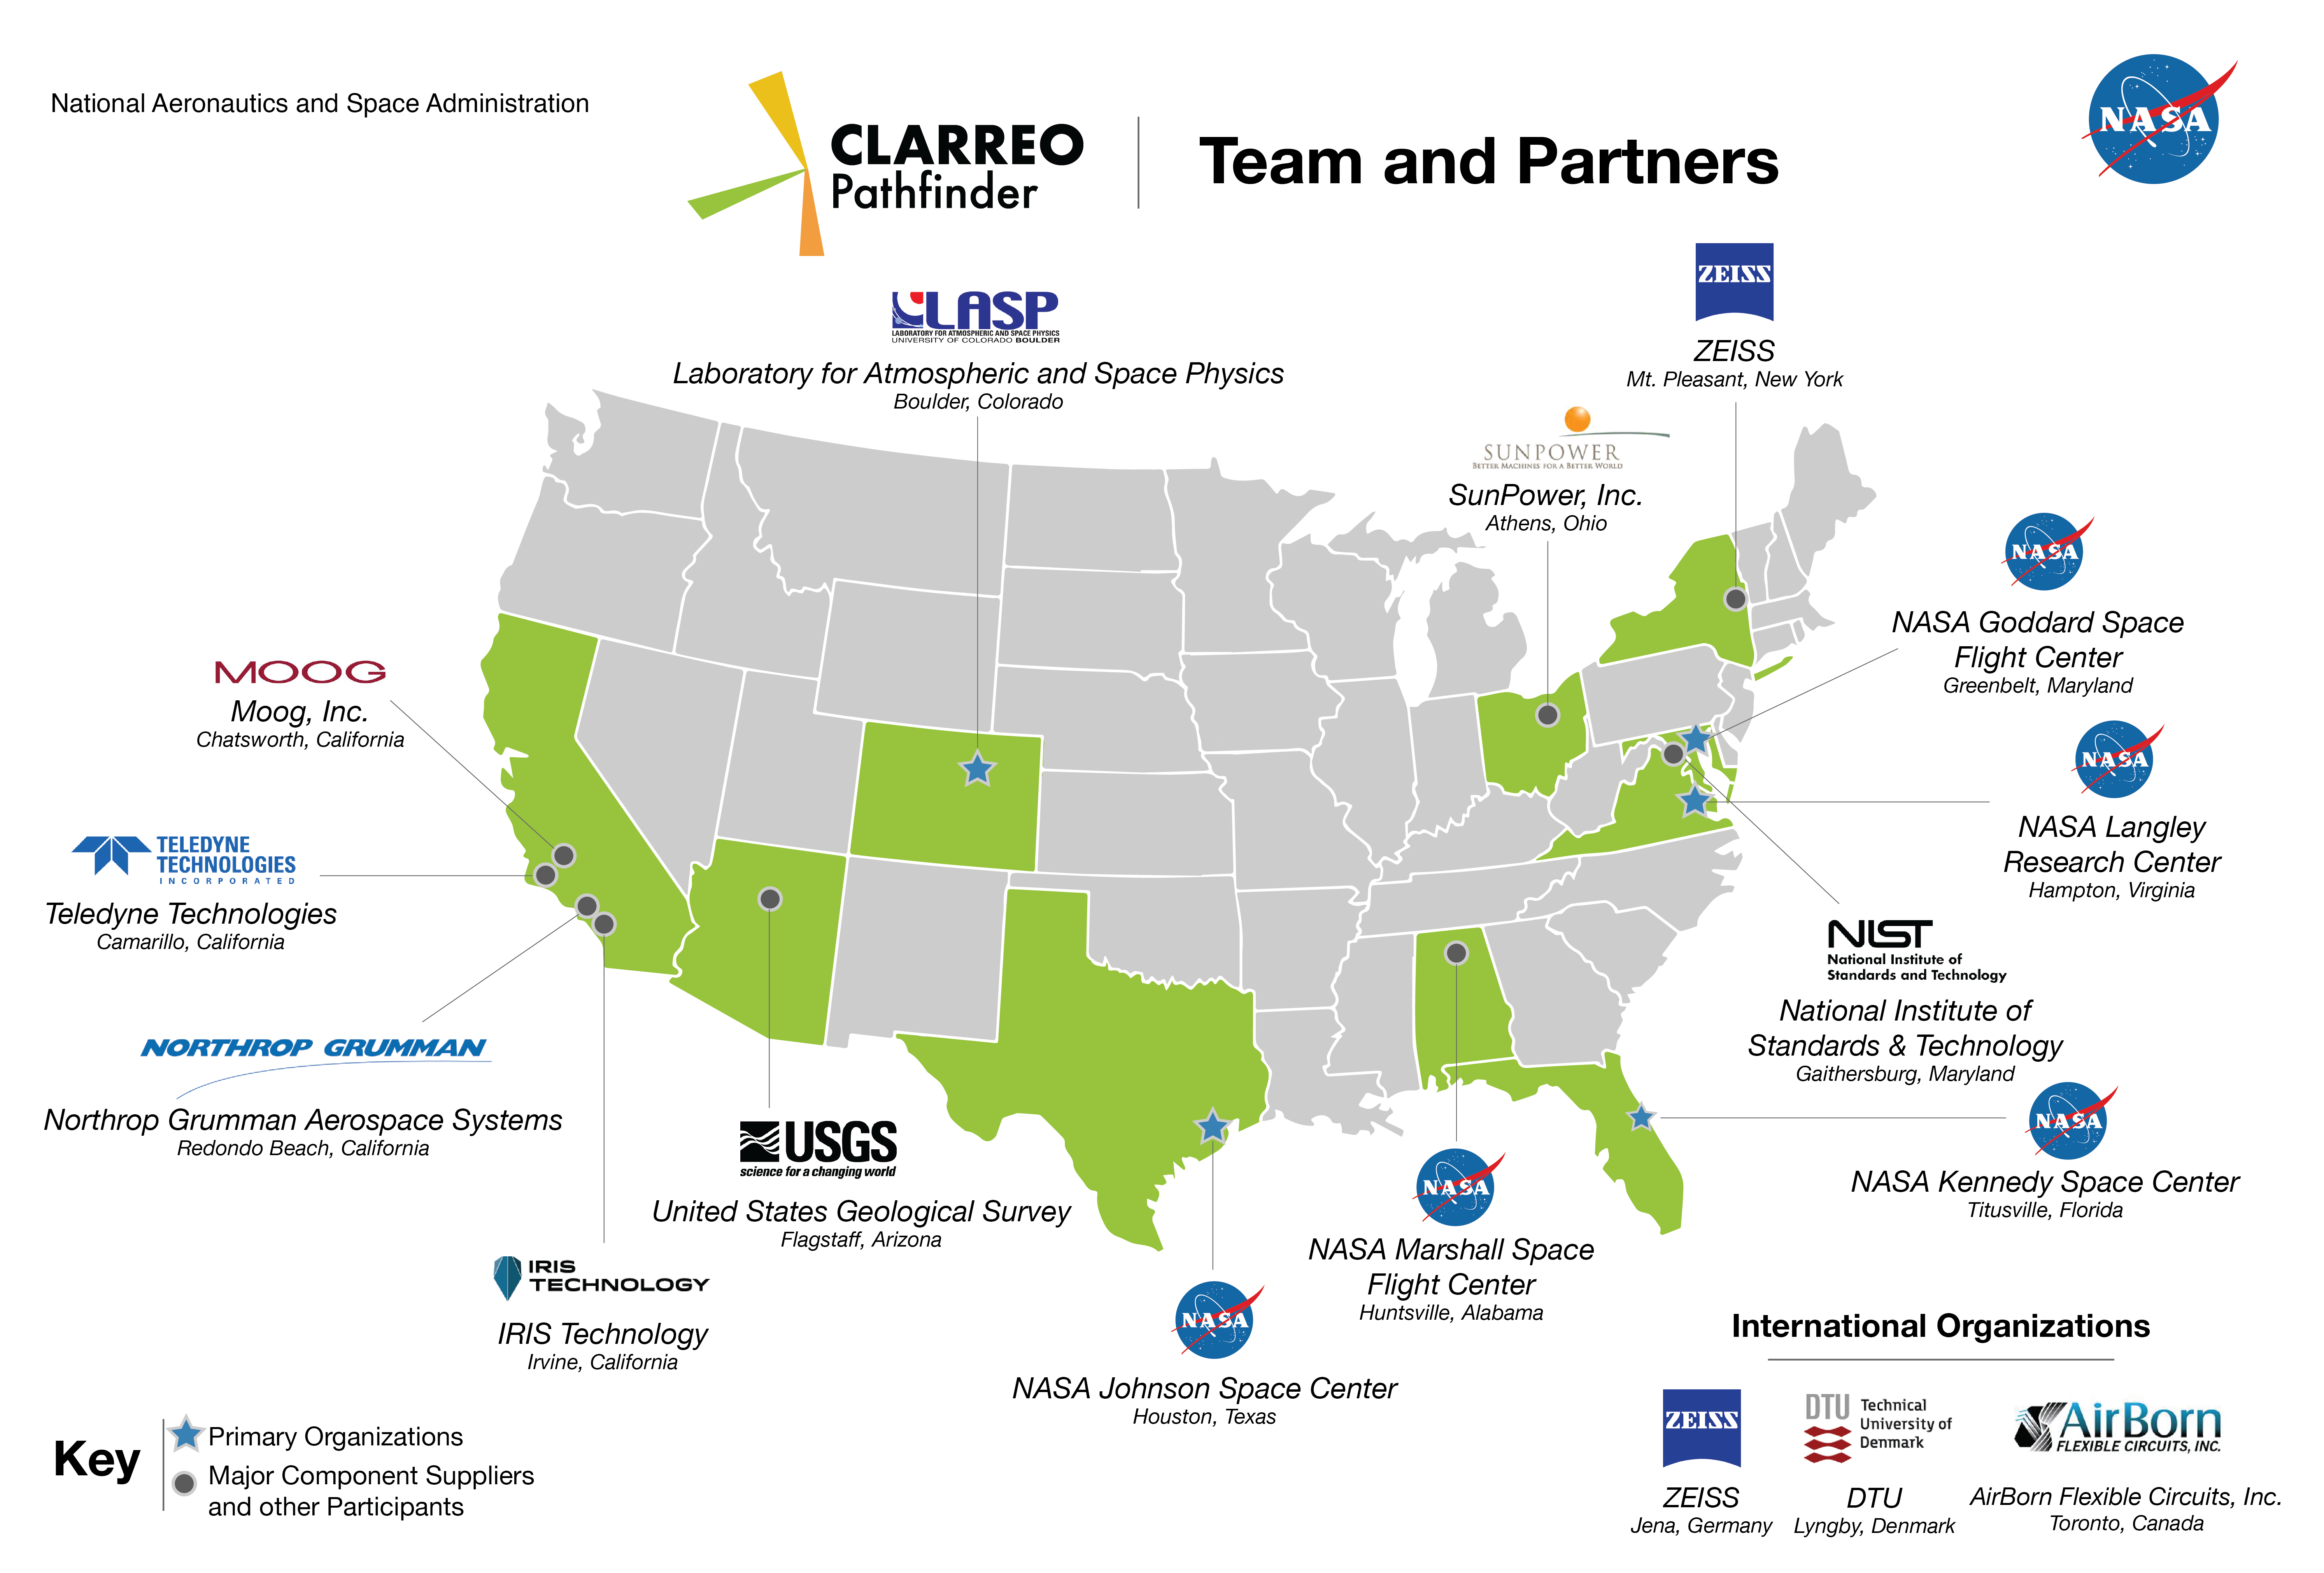 Map of the United States with the CLARREO Pathfinder team and partners shown by geographic location